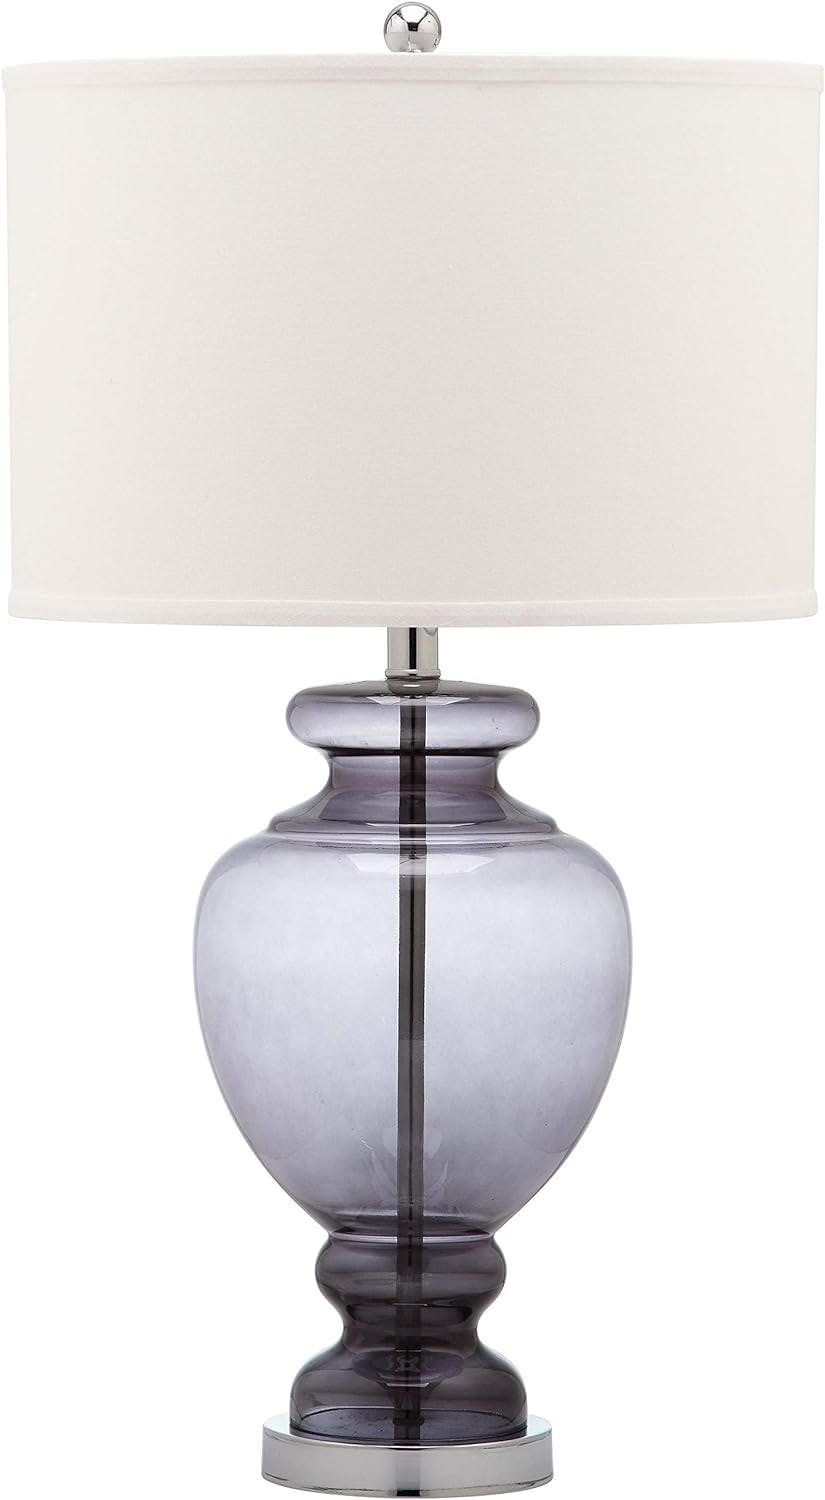 Translucent Grey Glass Table Lamp Set, 27" with Off-White Shade